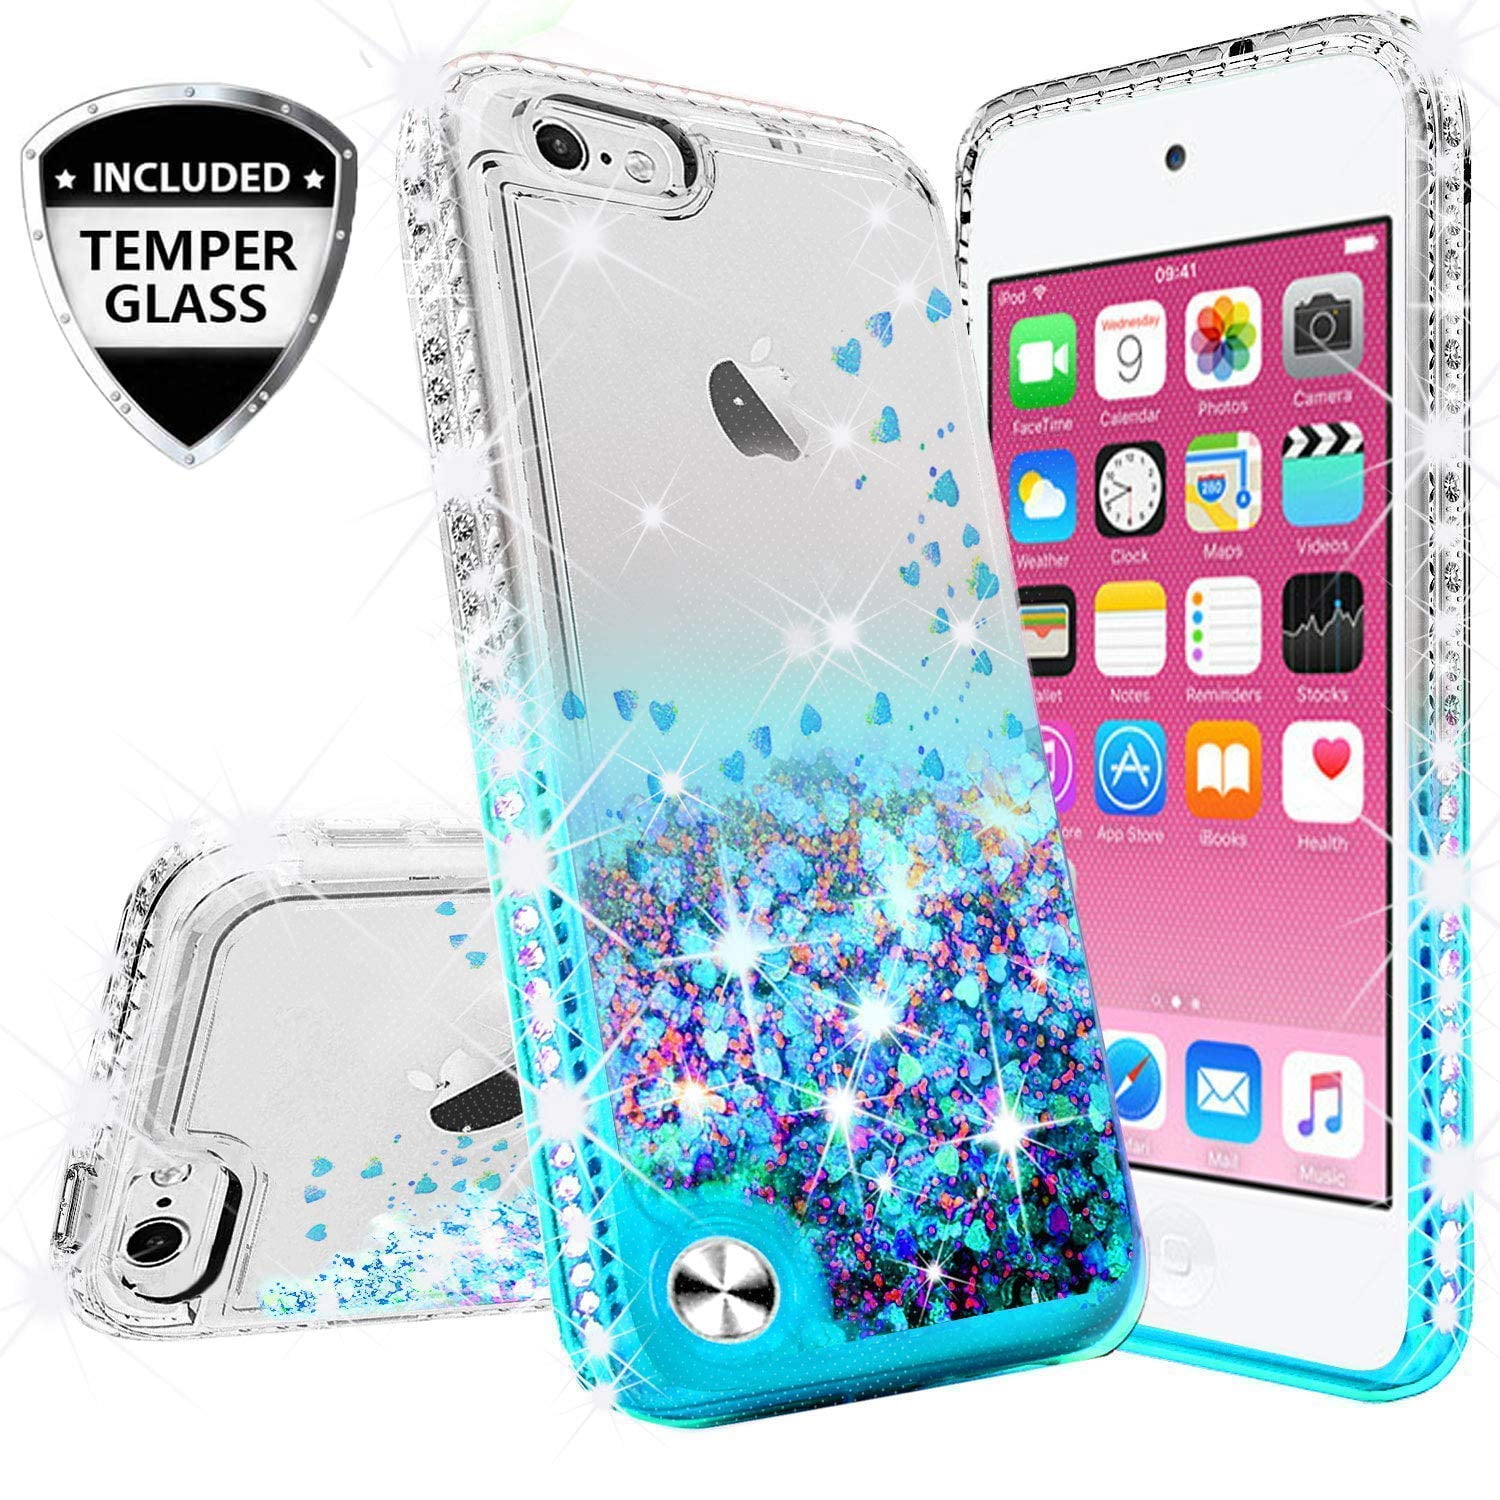 Protective Cover for Apple iPhone 8 Plus 5.5 Inch iPhone 8 Plus Case Hard PC Back, Soft TPU Inner Bling Glitter Shockproof Dual Layer Black iPhone 7 Plus Case with Screen Protector and Lanyard 